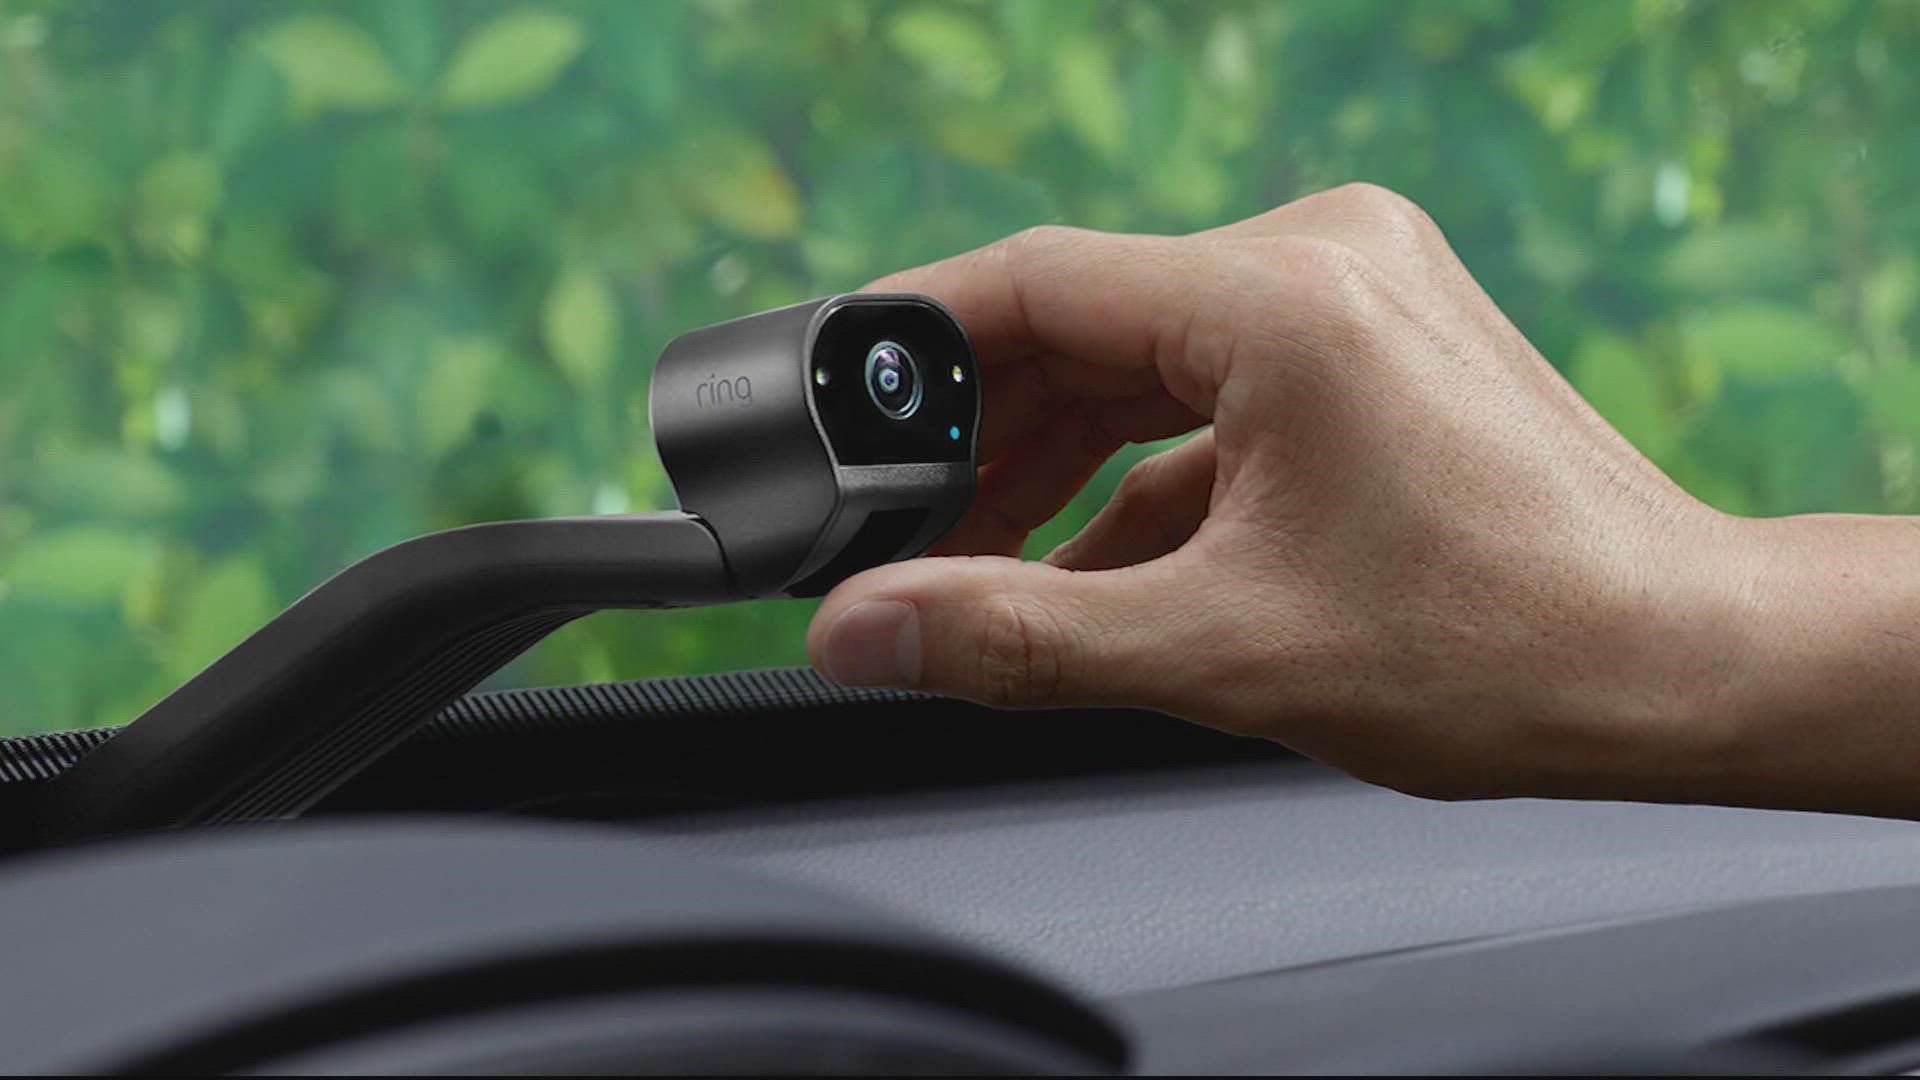 Amazon announced it will launch the Ring Car Cam, a small two-way camera that sits on the dashboard of your vehicle.